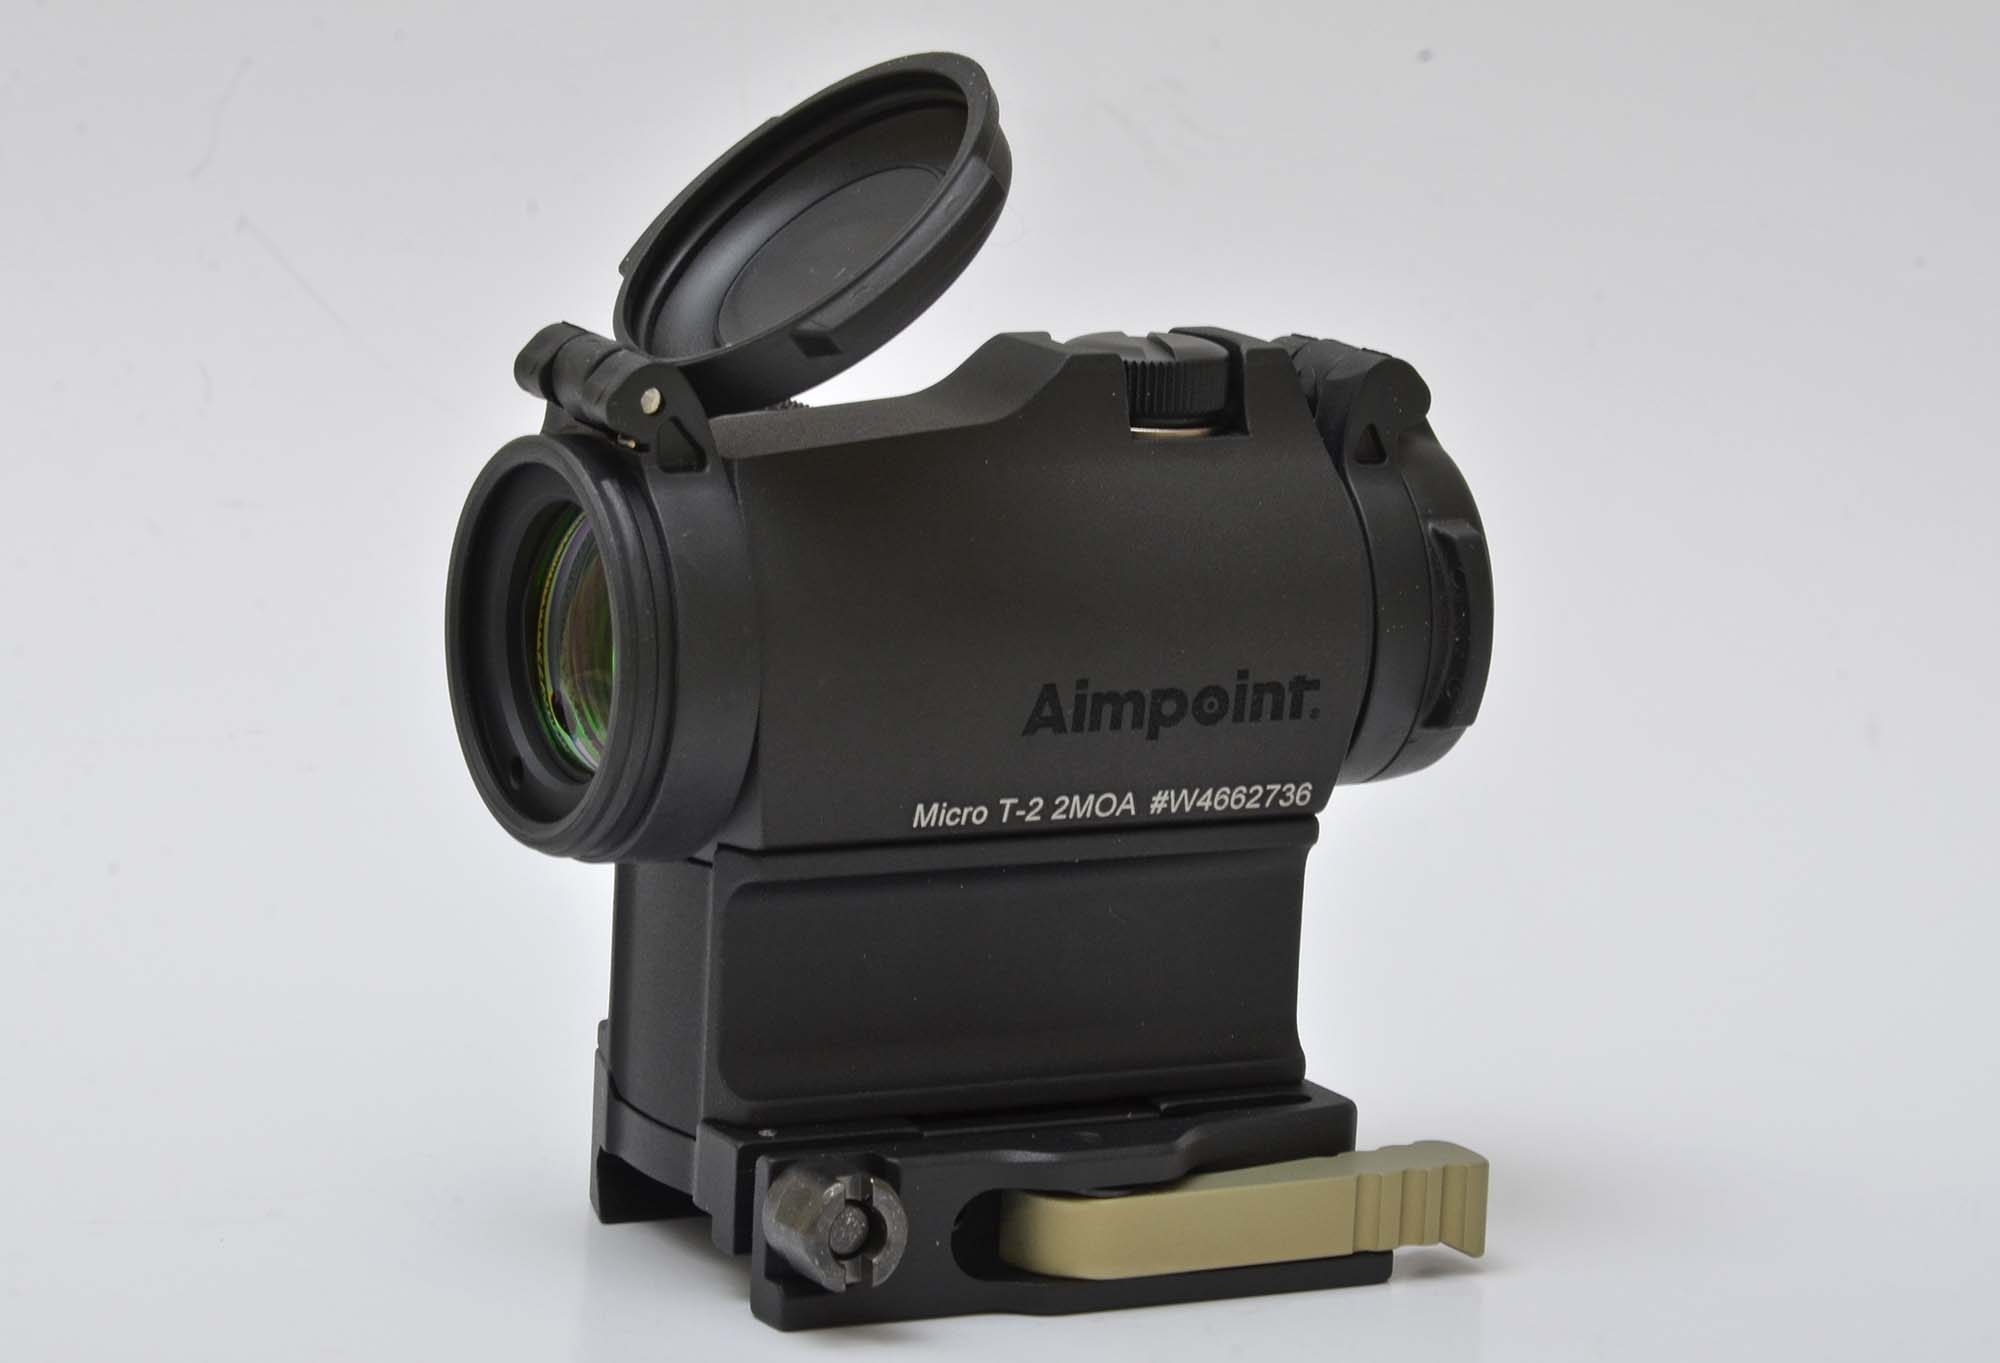 Aimpoint Micro T-2 2 MOA red dot sight | all4shooters